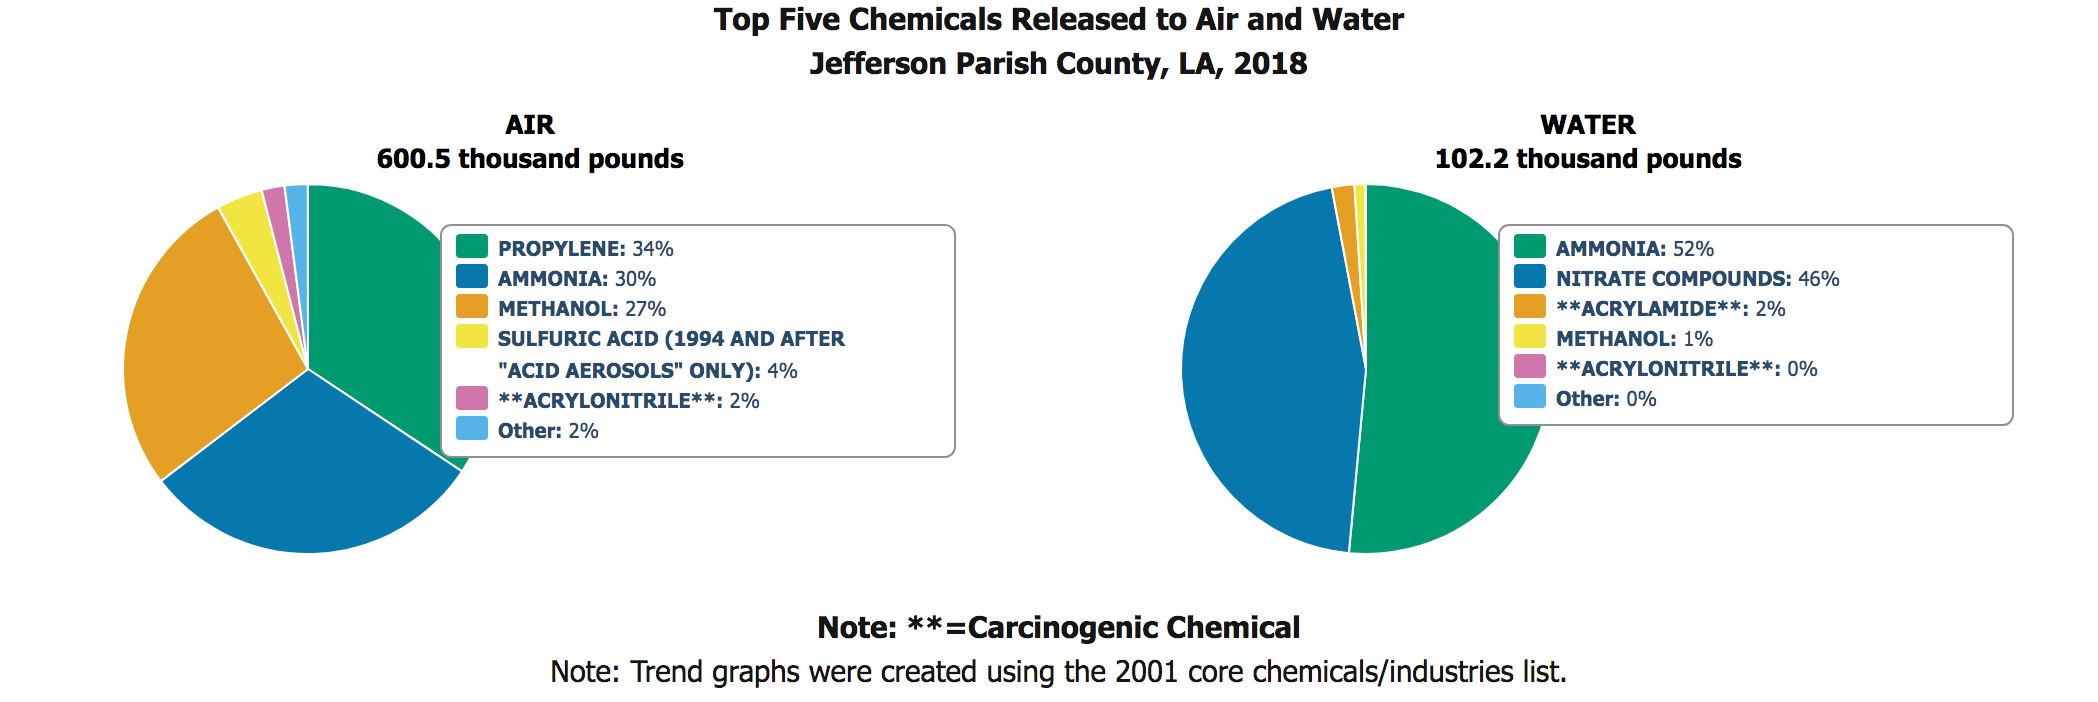 These are the major chemicals reported to EPA's Toxic Release Inventory(TRI) in Jefferson Parish